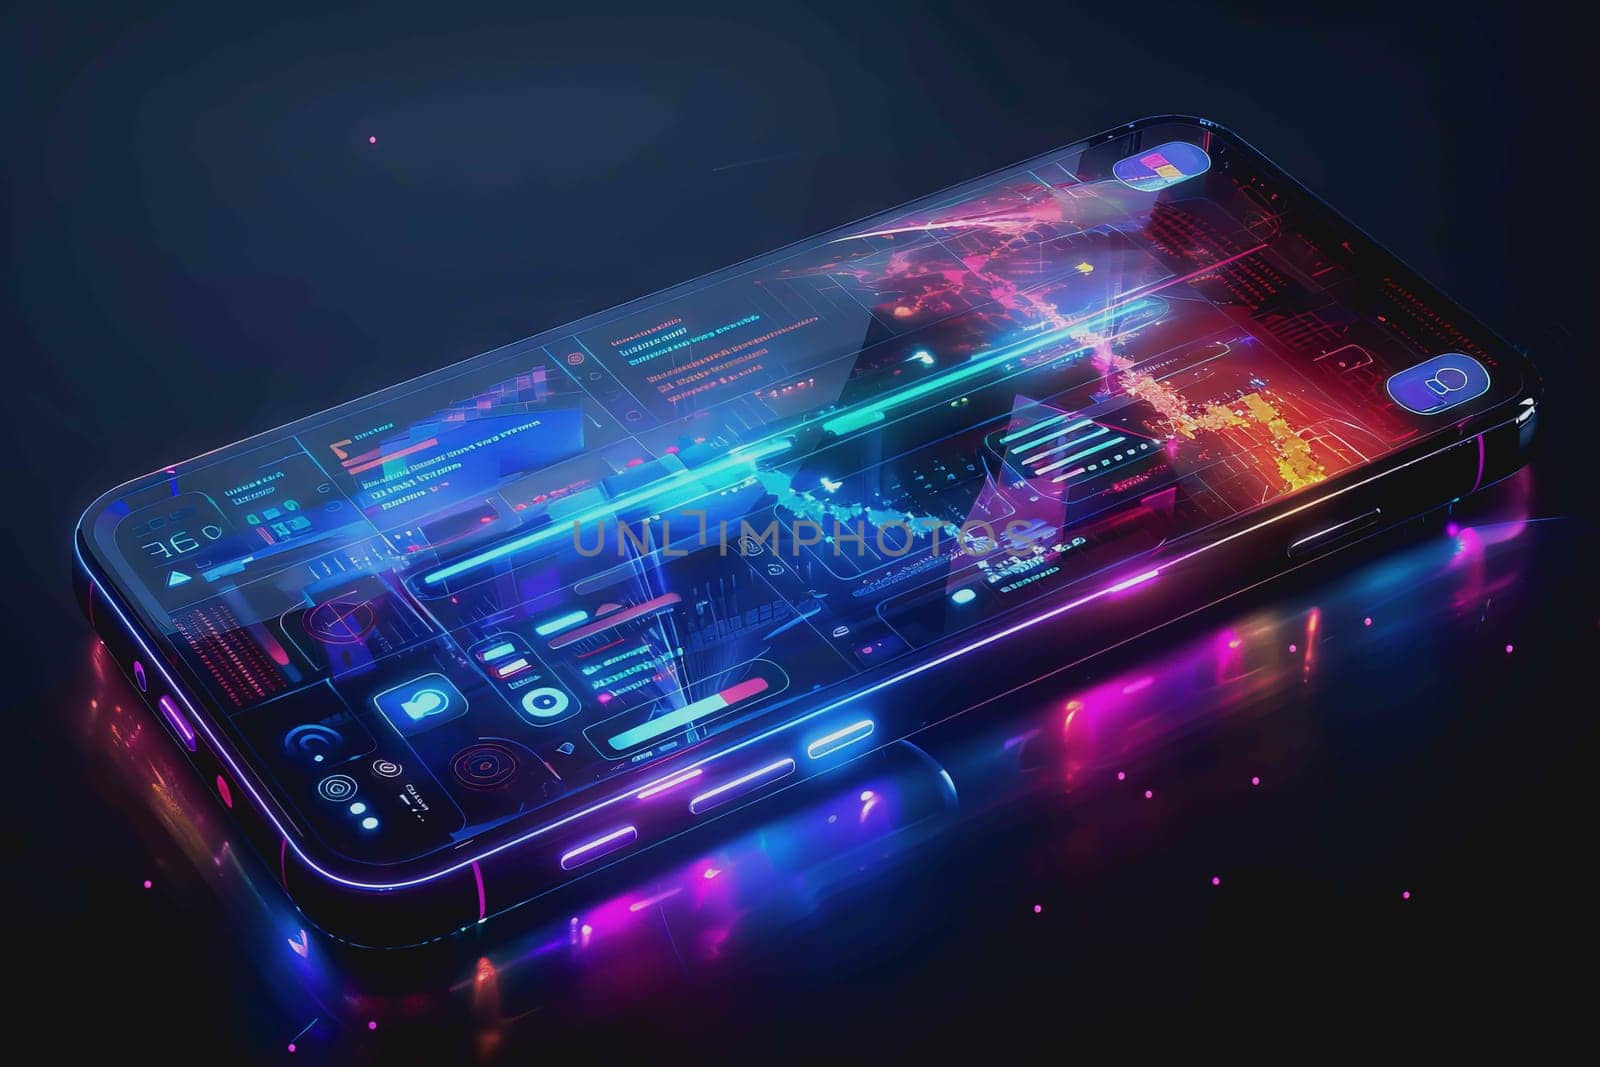 smartphone a transparent display shows user interface components, UX, UI, futuristic technology